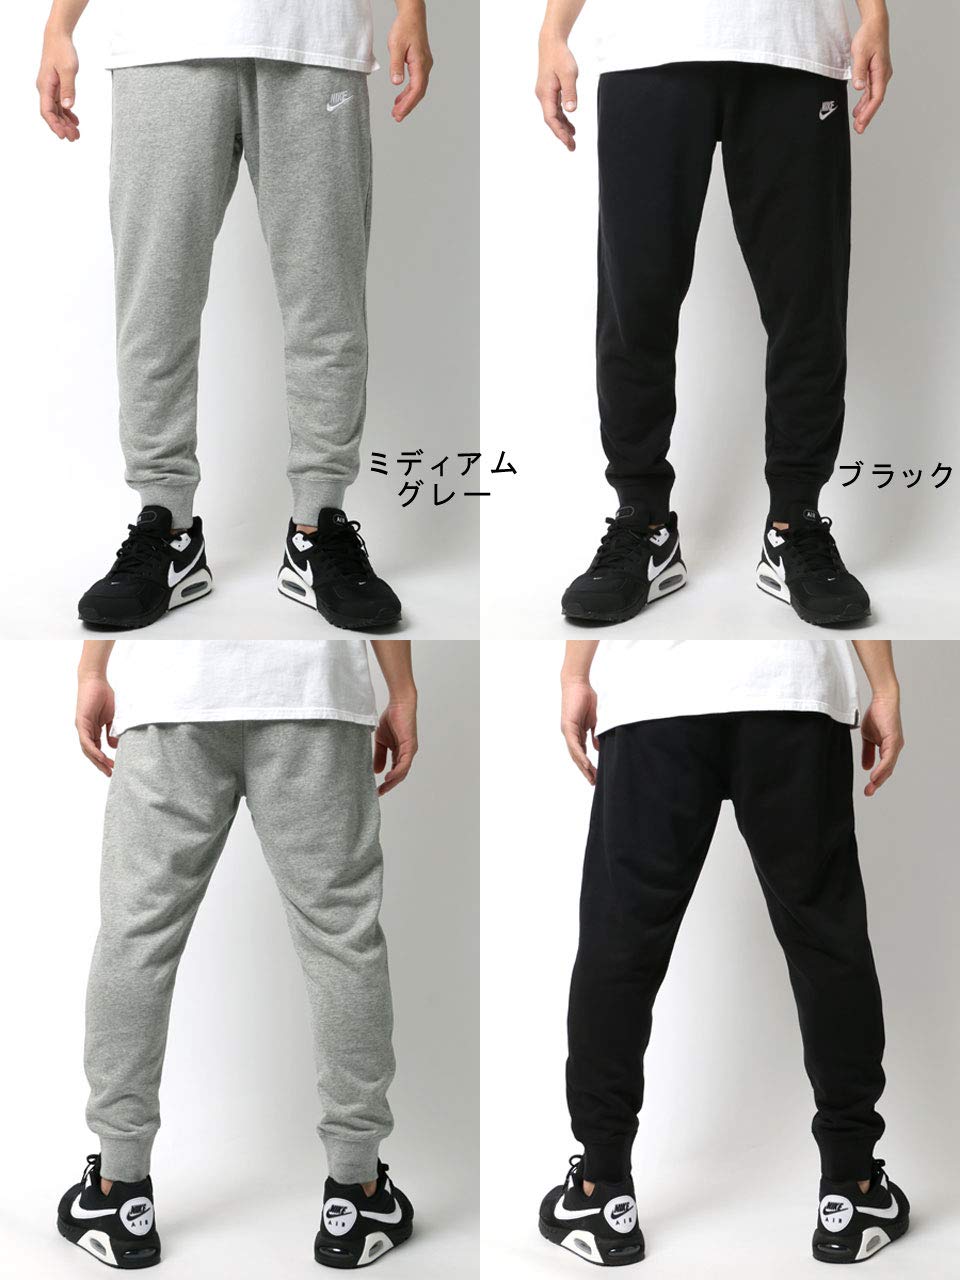 Nike Men's Sweat Pants, Trousers, Fashion, Workout Jogging Pants Available in 2 Colors - blk